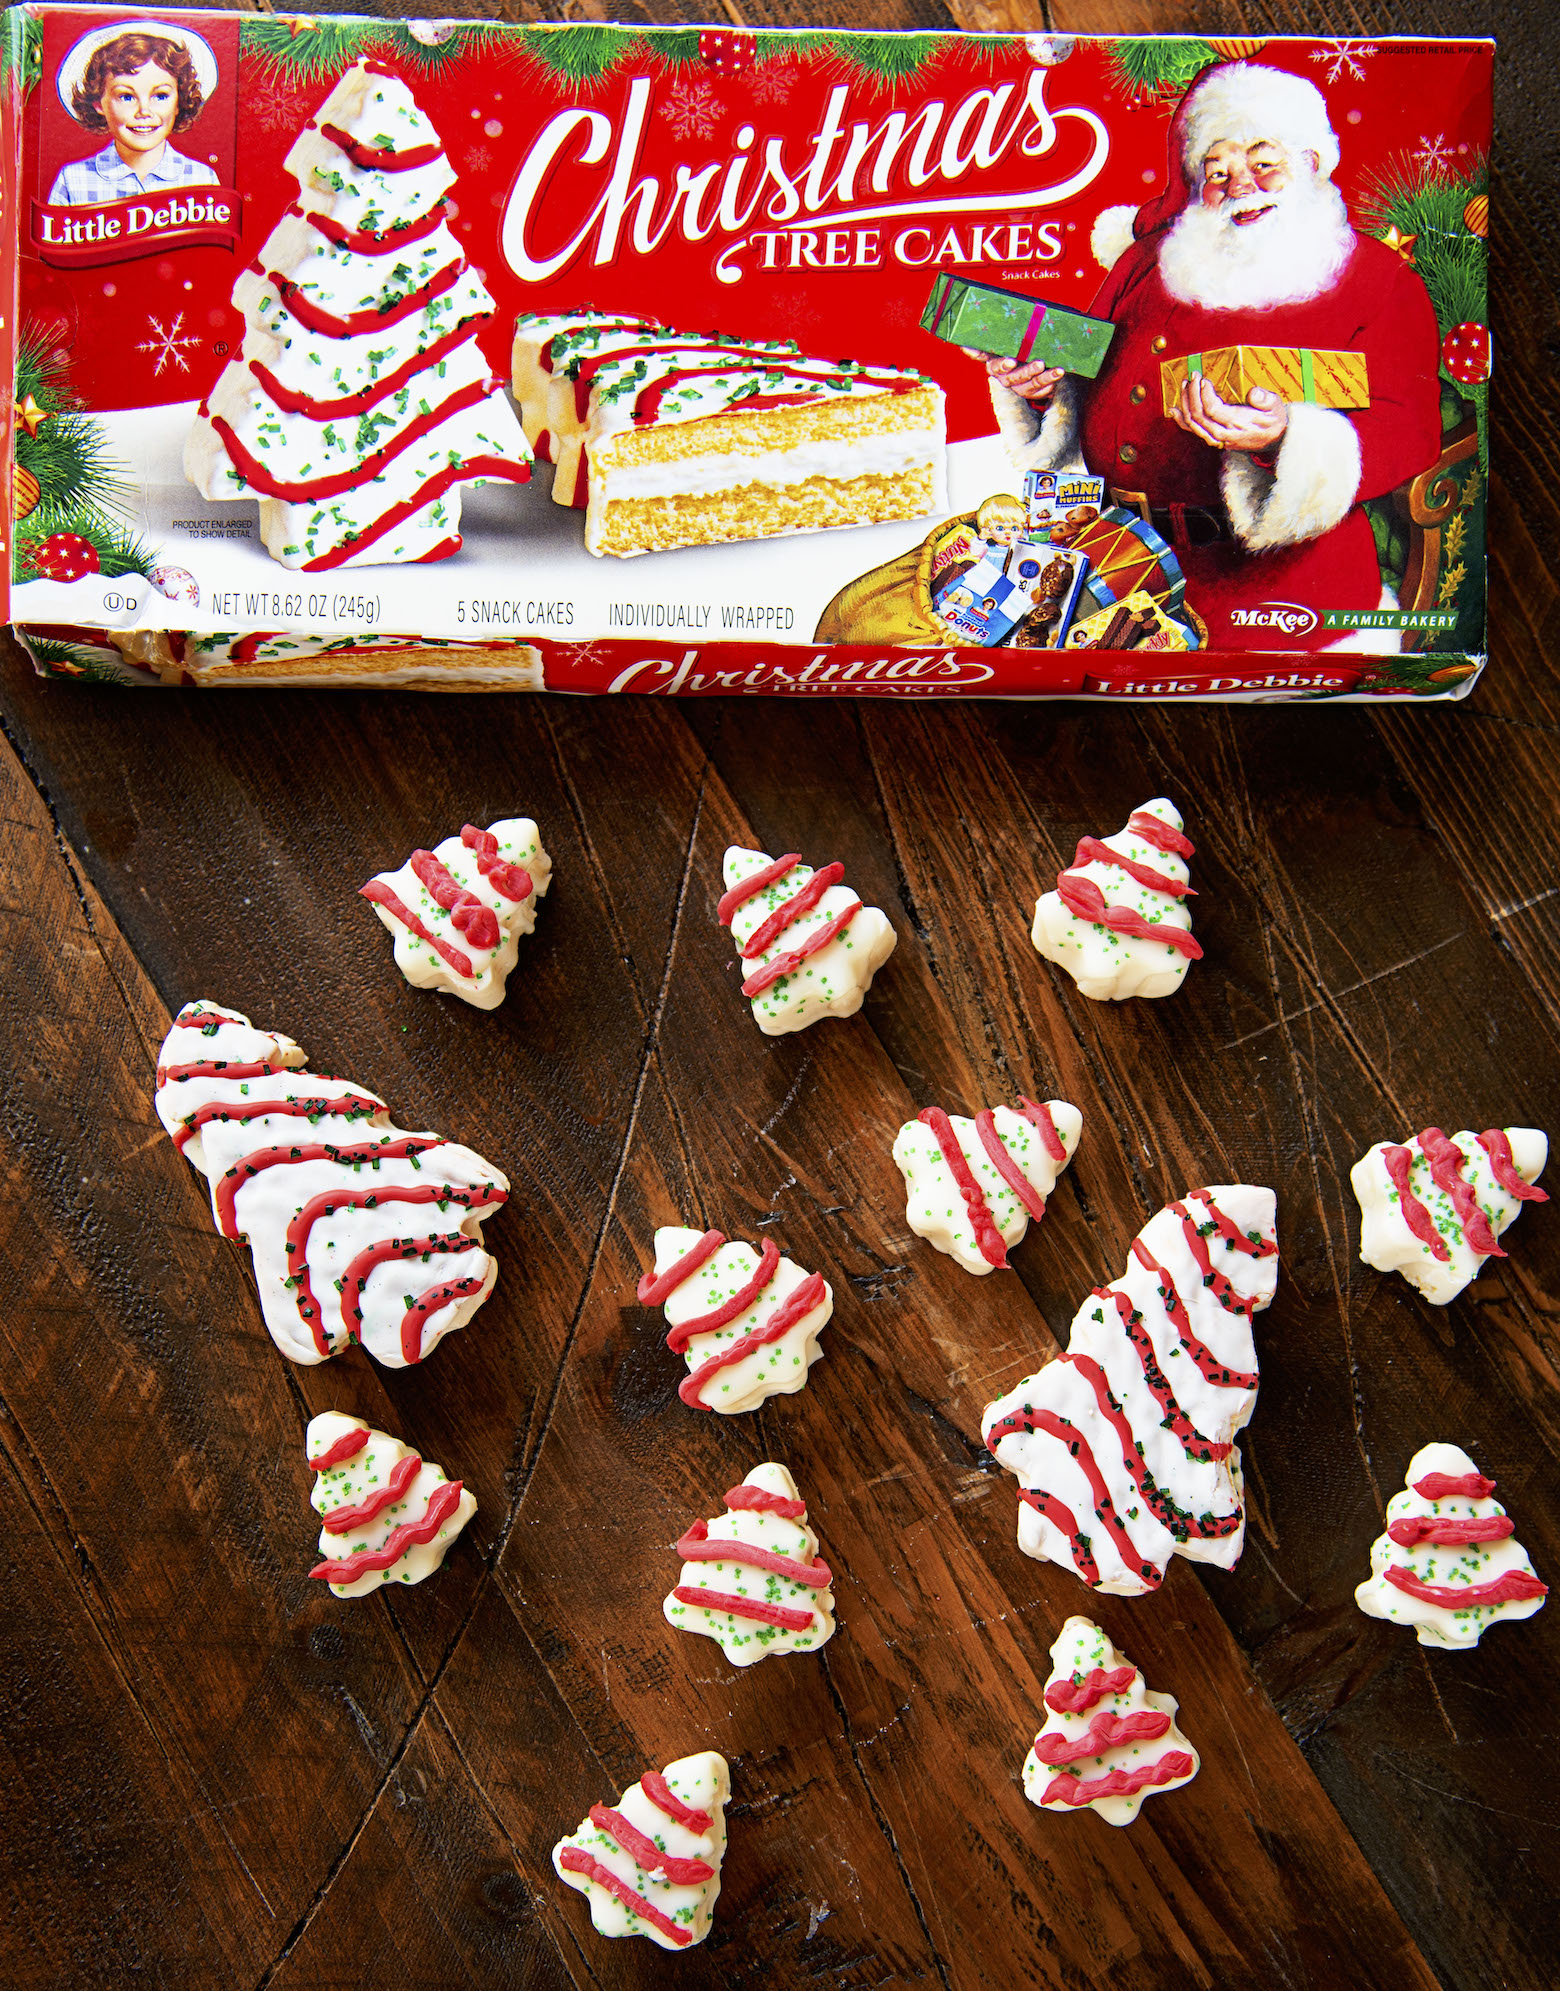 Scattered Christmas Tree Cake Fudge pieces on a wood background with a package of Little Debbie Christmas Tree Cakes box. 